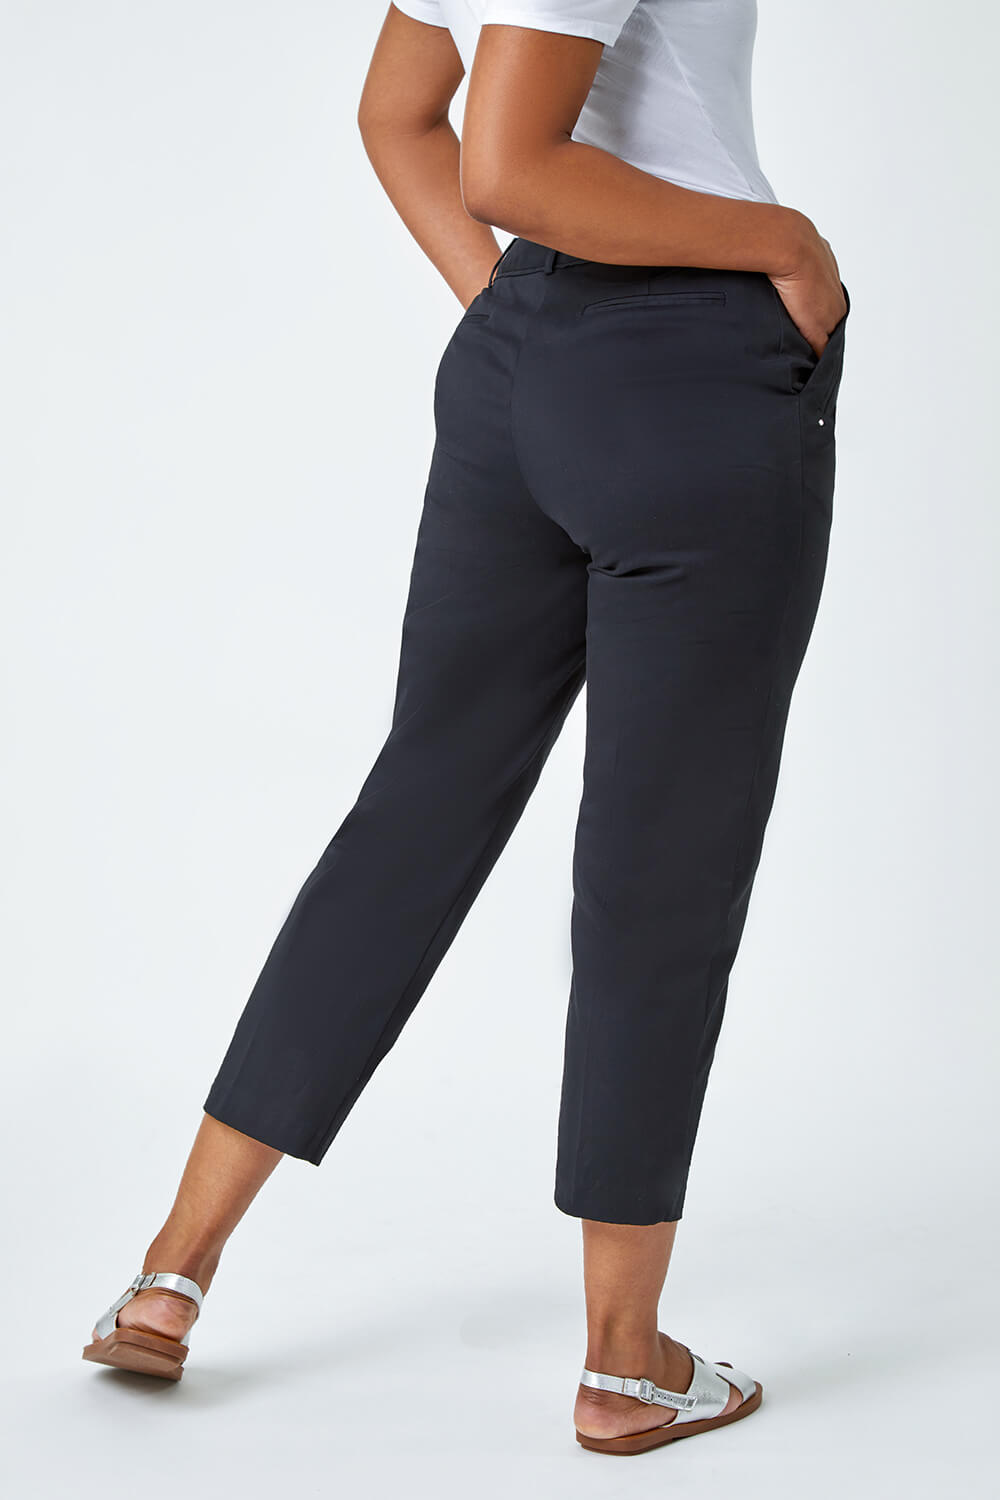 Black Petite Cotton Blend Stretch Trousers, Image 3 of 5